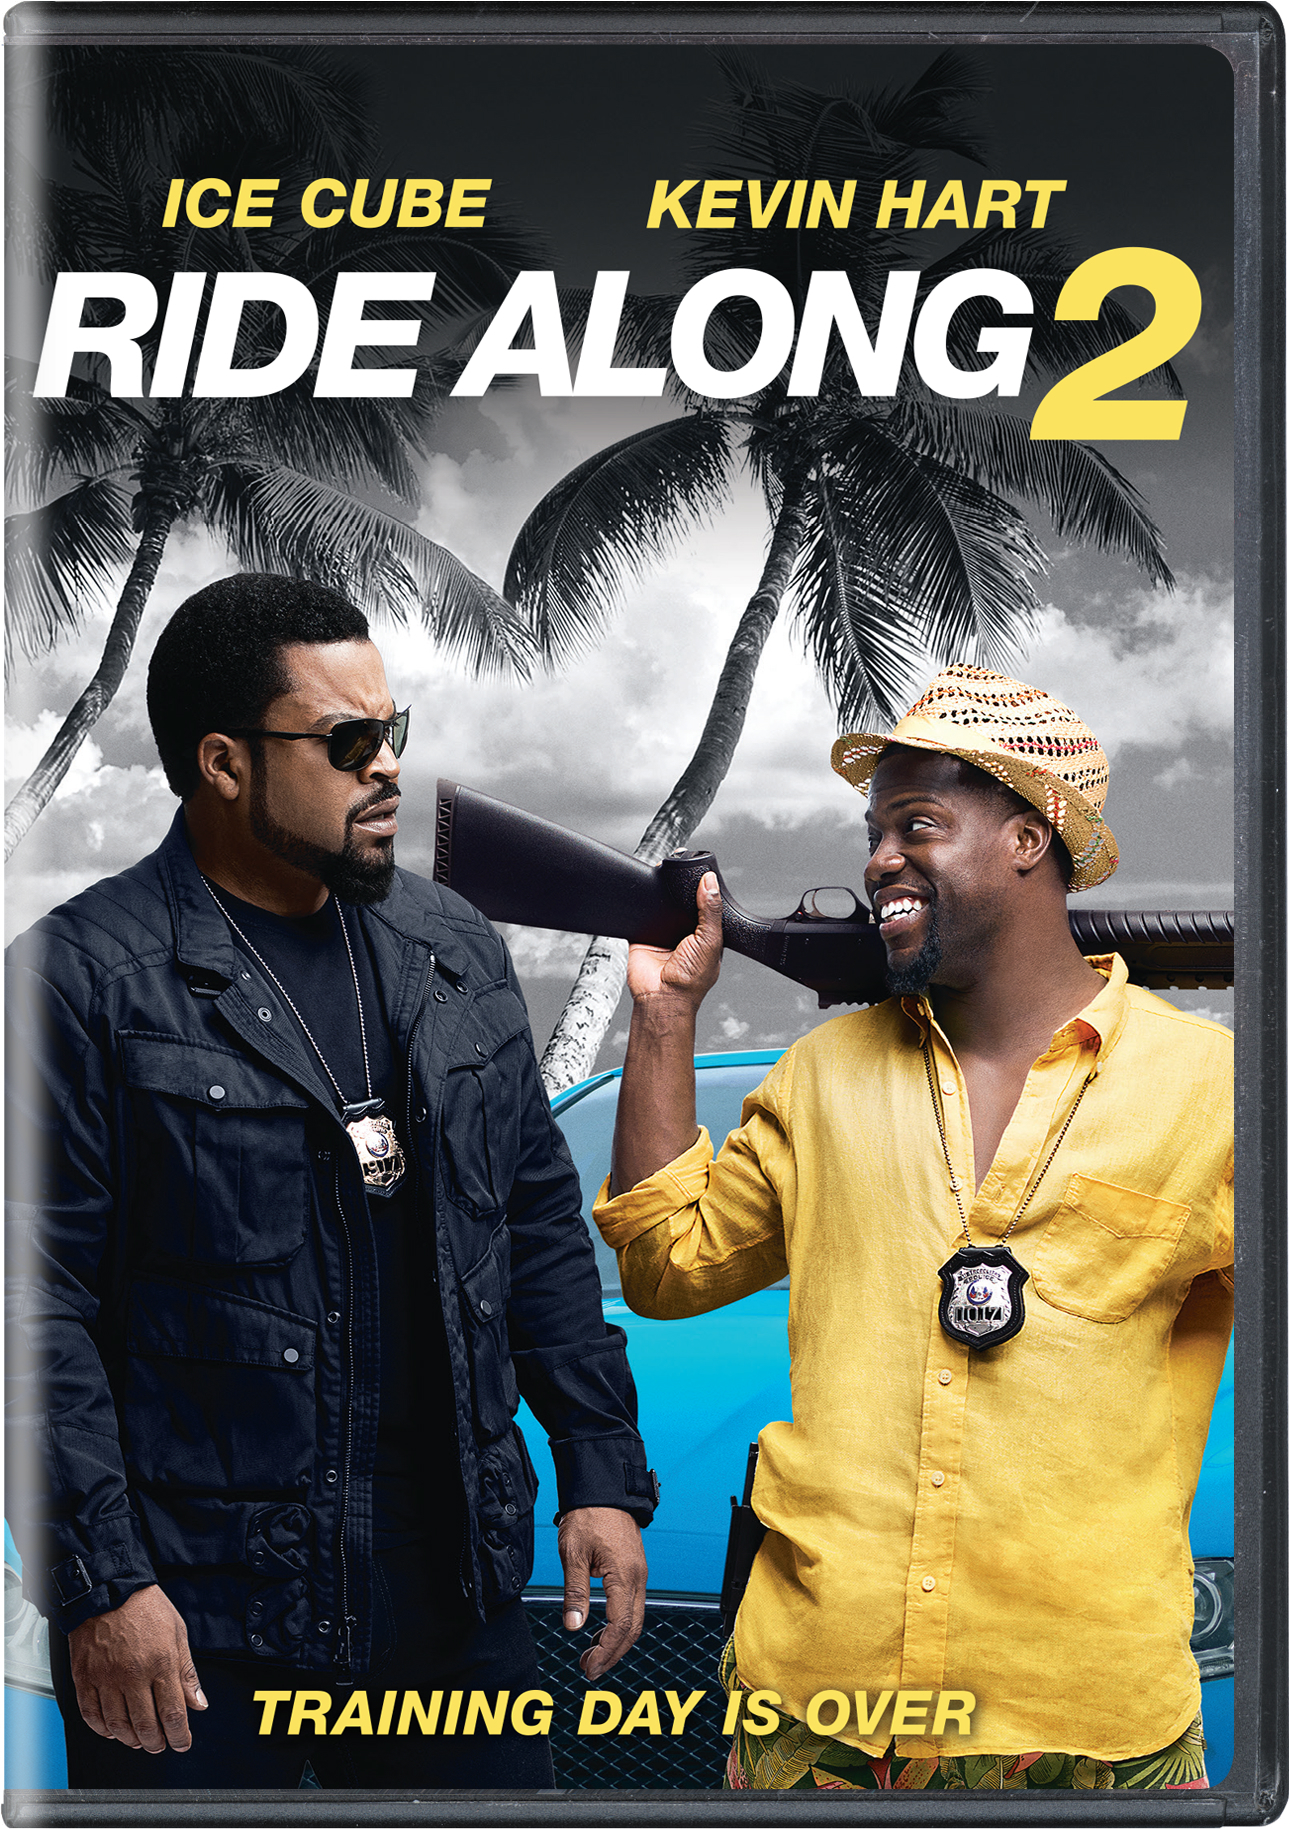 Ride Along 2 - DVD [ 2016 ]  - Action Movies On DVD - Movies On GRUV